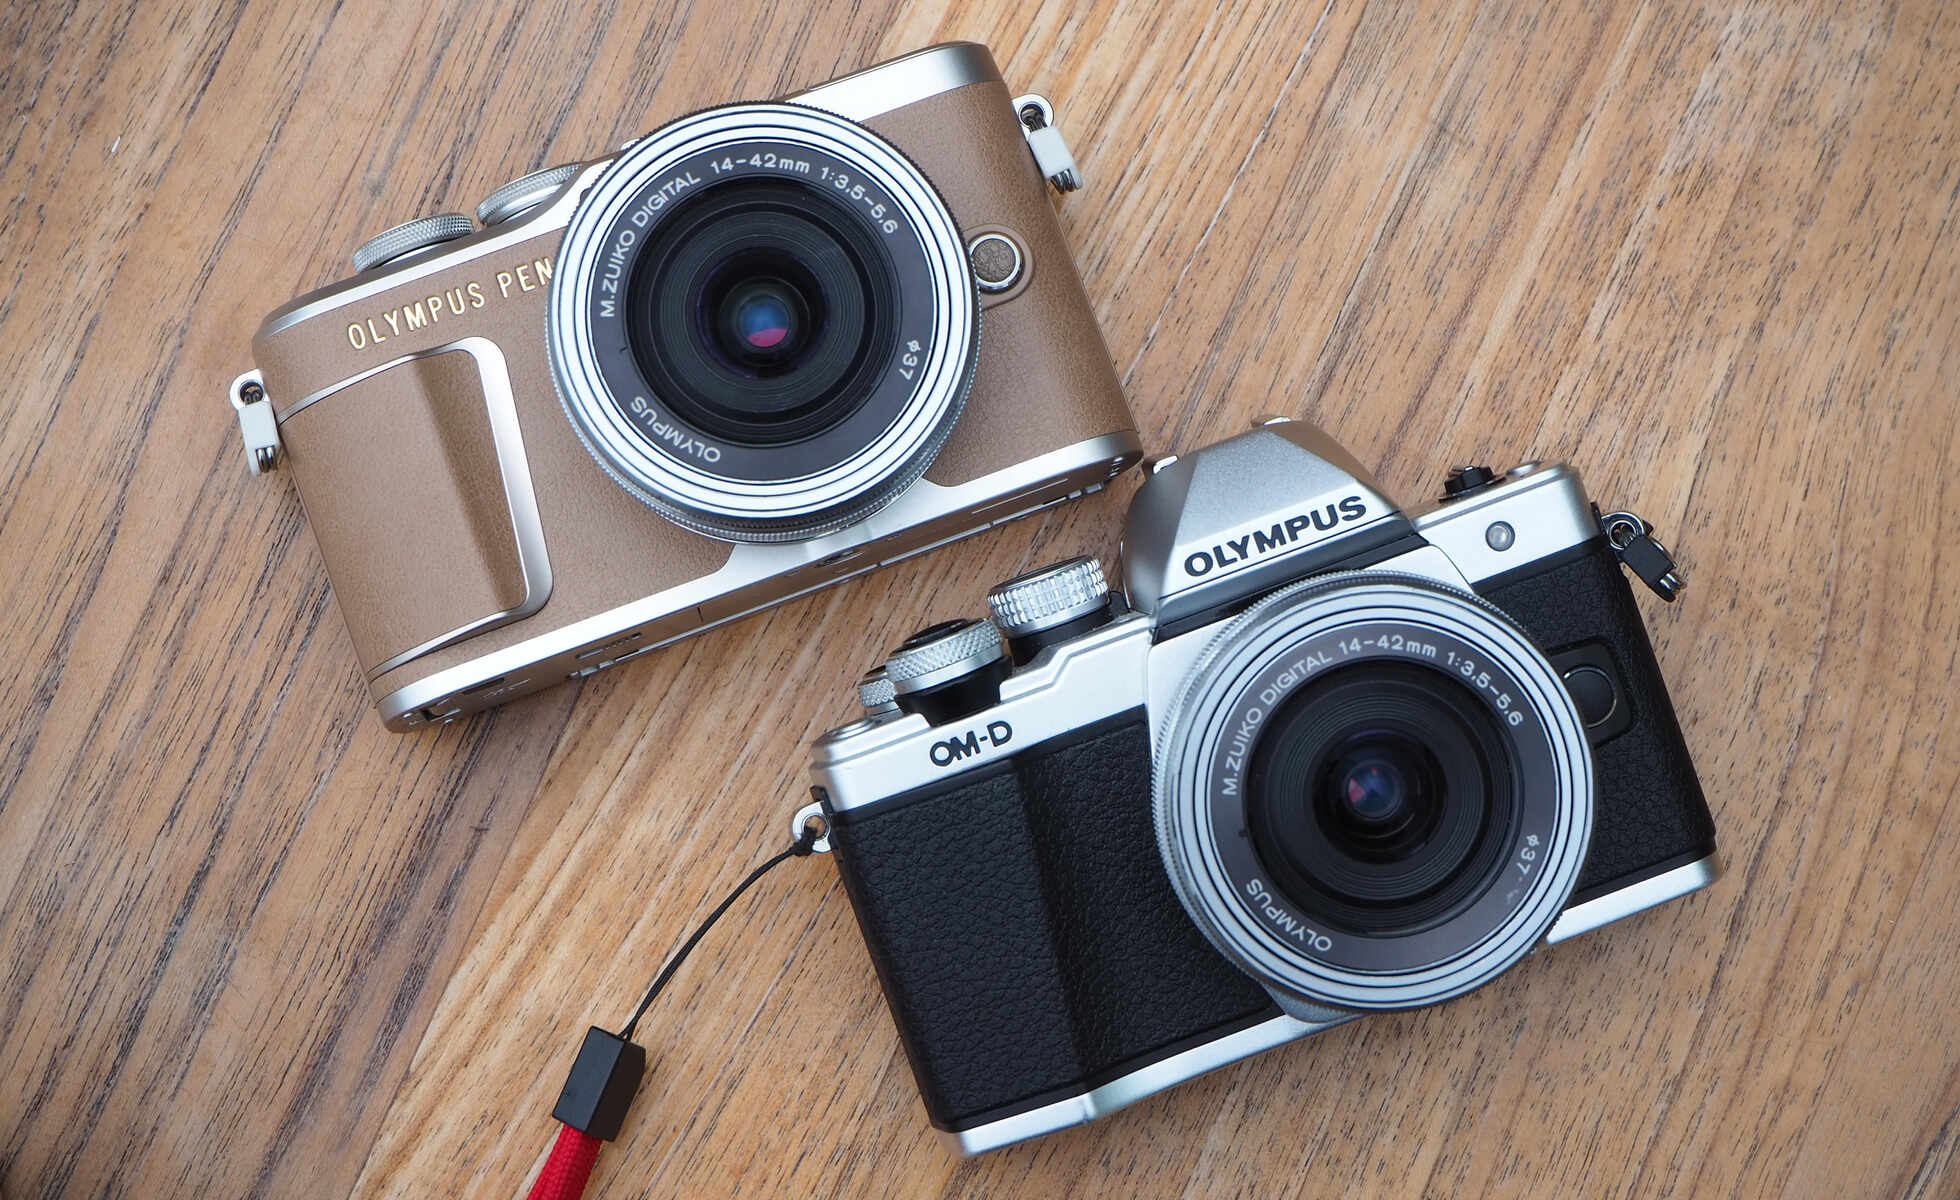 Olympus Pen E-PL9 Mirrorless Camera Vs Olympus OM-D E-M10 Mark II: Which One Is The Newest Kind?